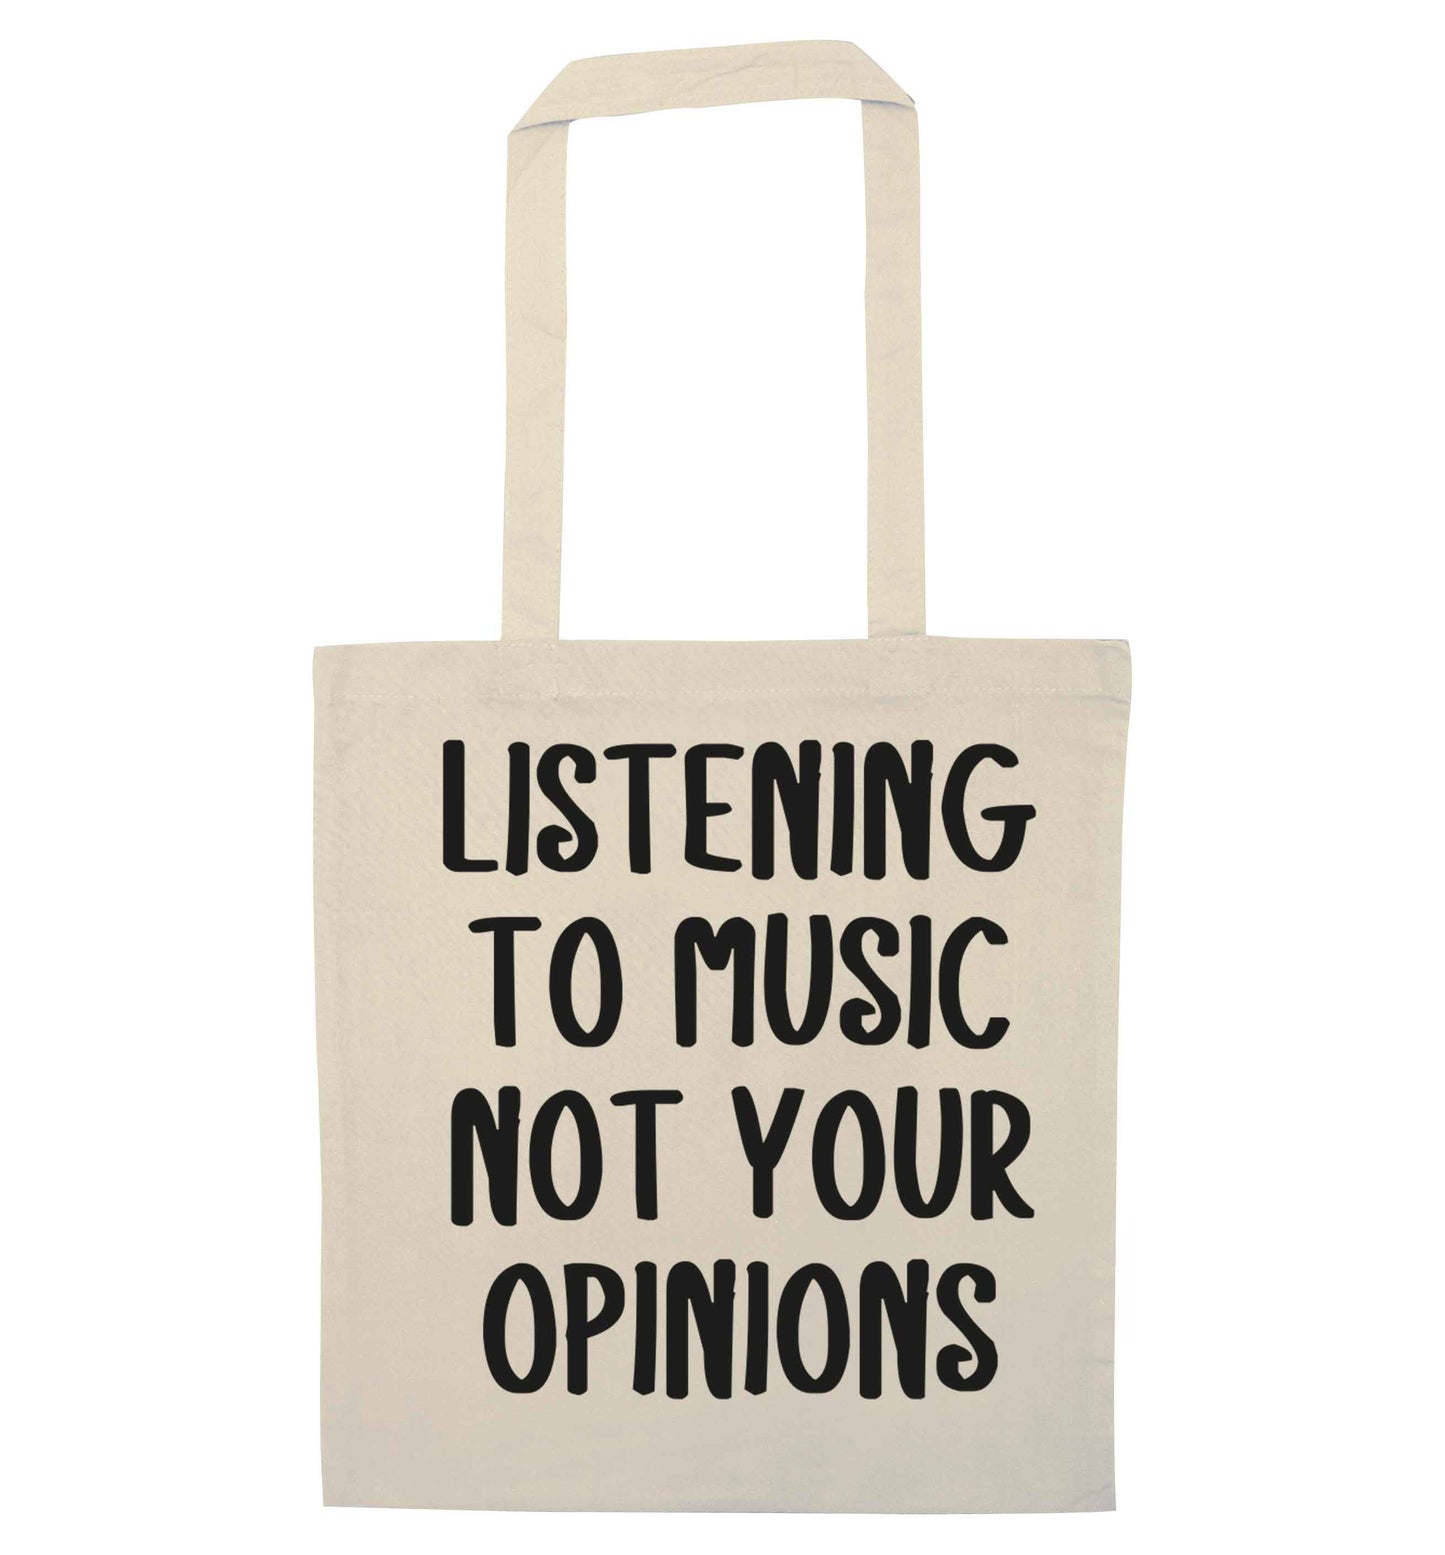 Listening to music not your opinions natural tote bag